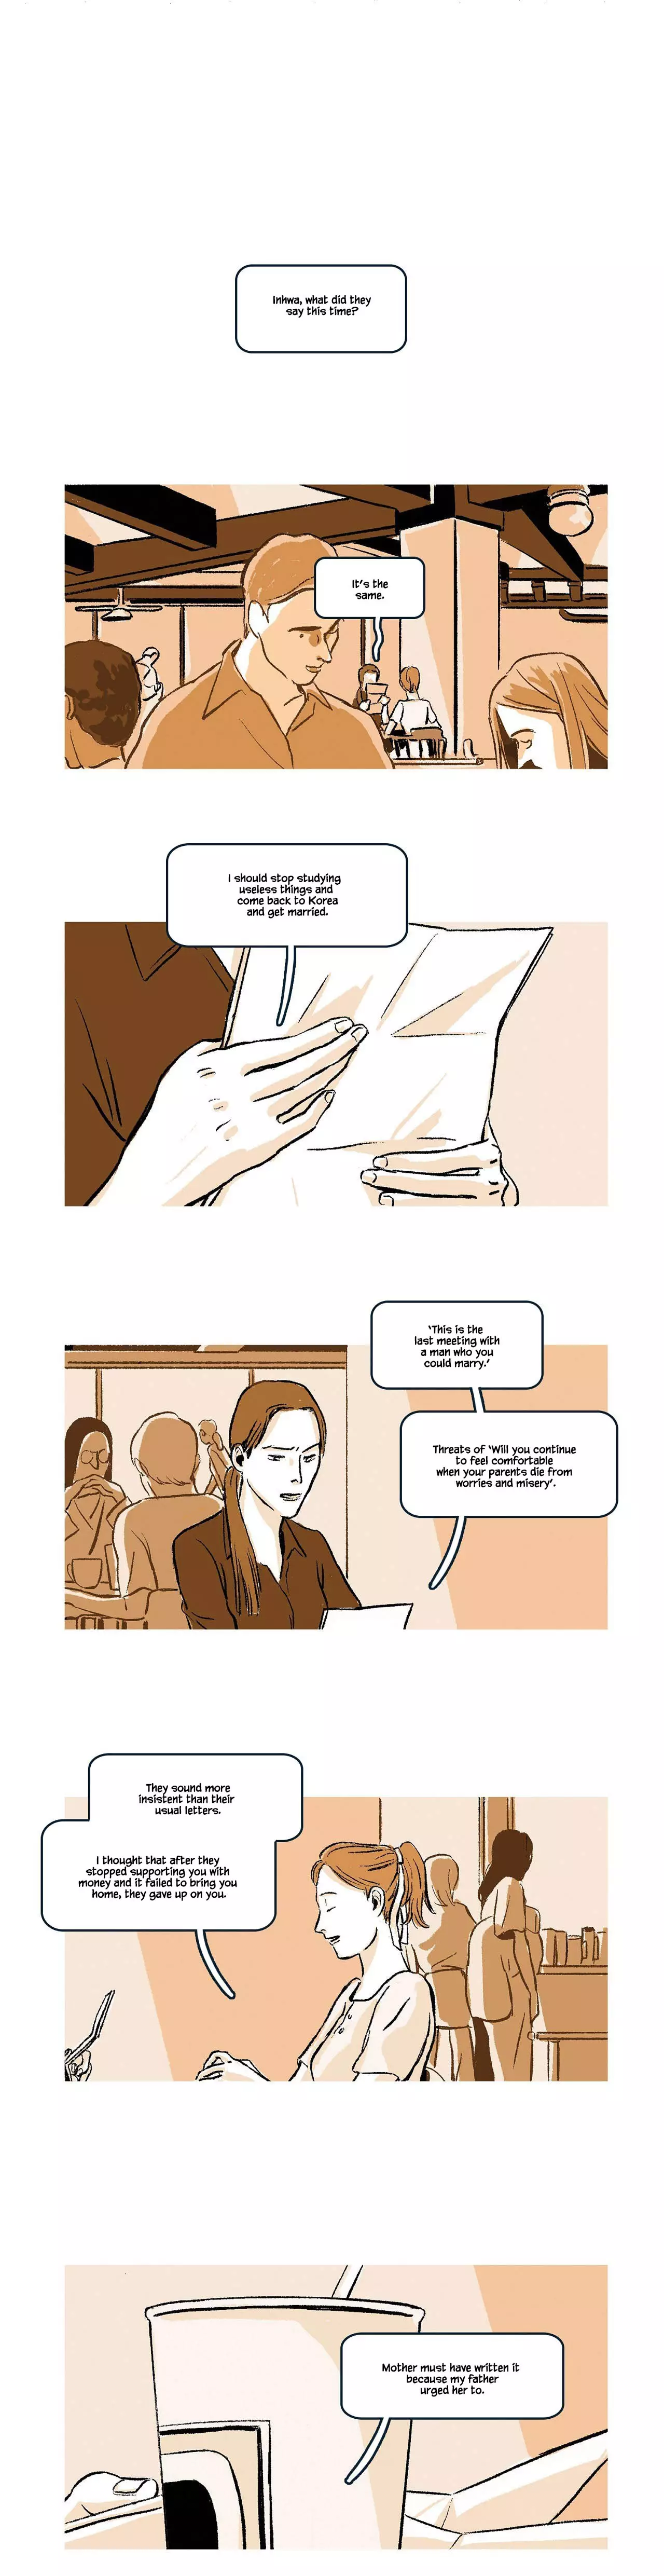 The Professor Who Reads Love Stories - 27 page 1-2c2b2fcb